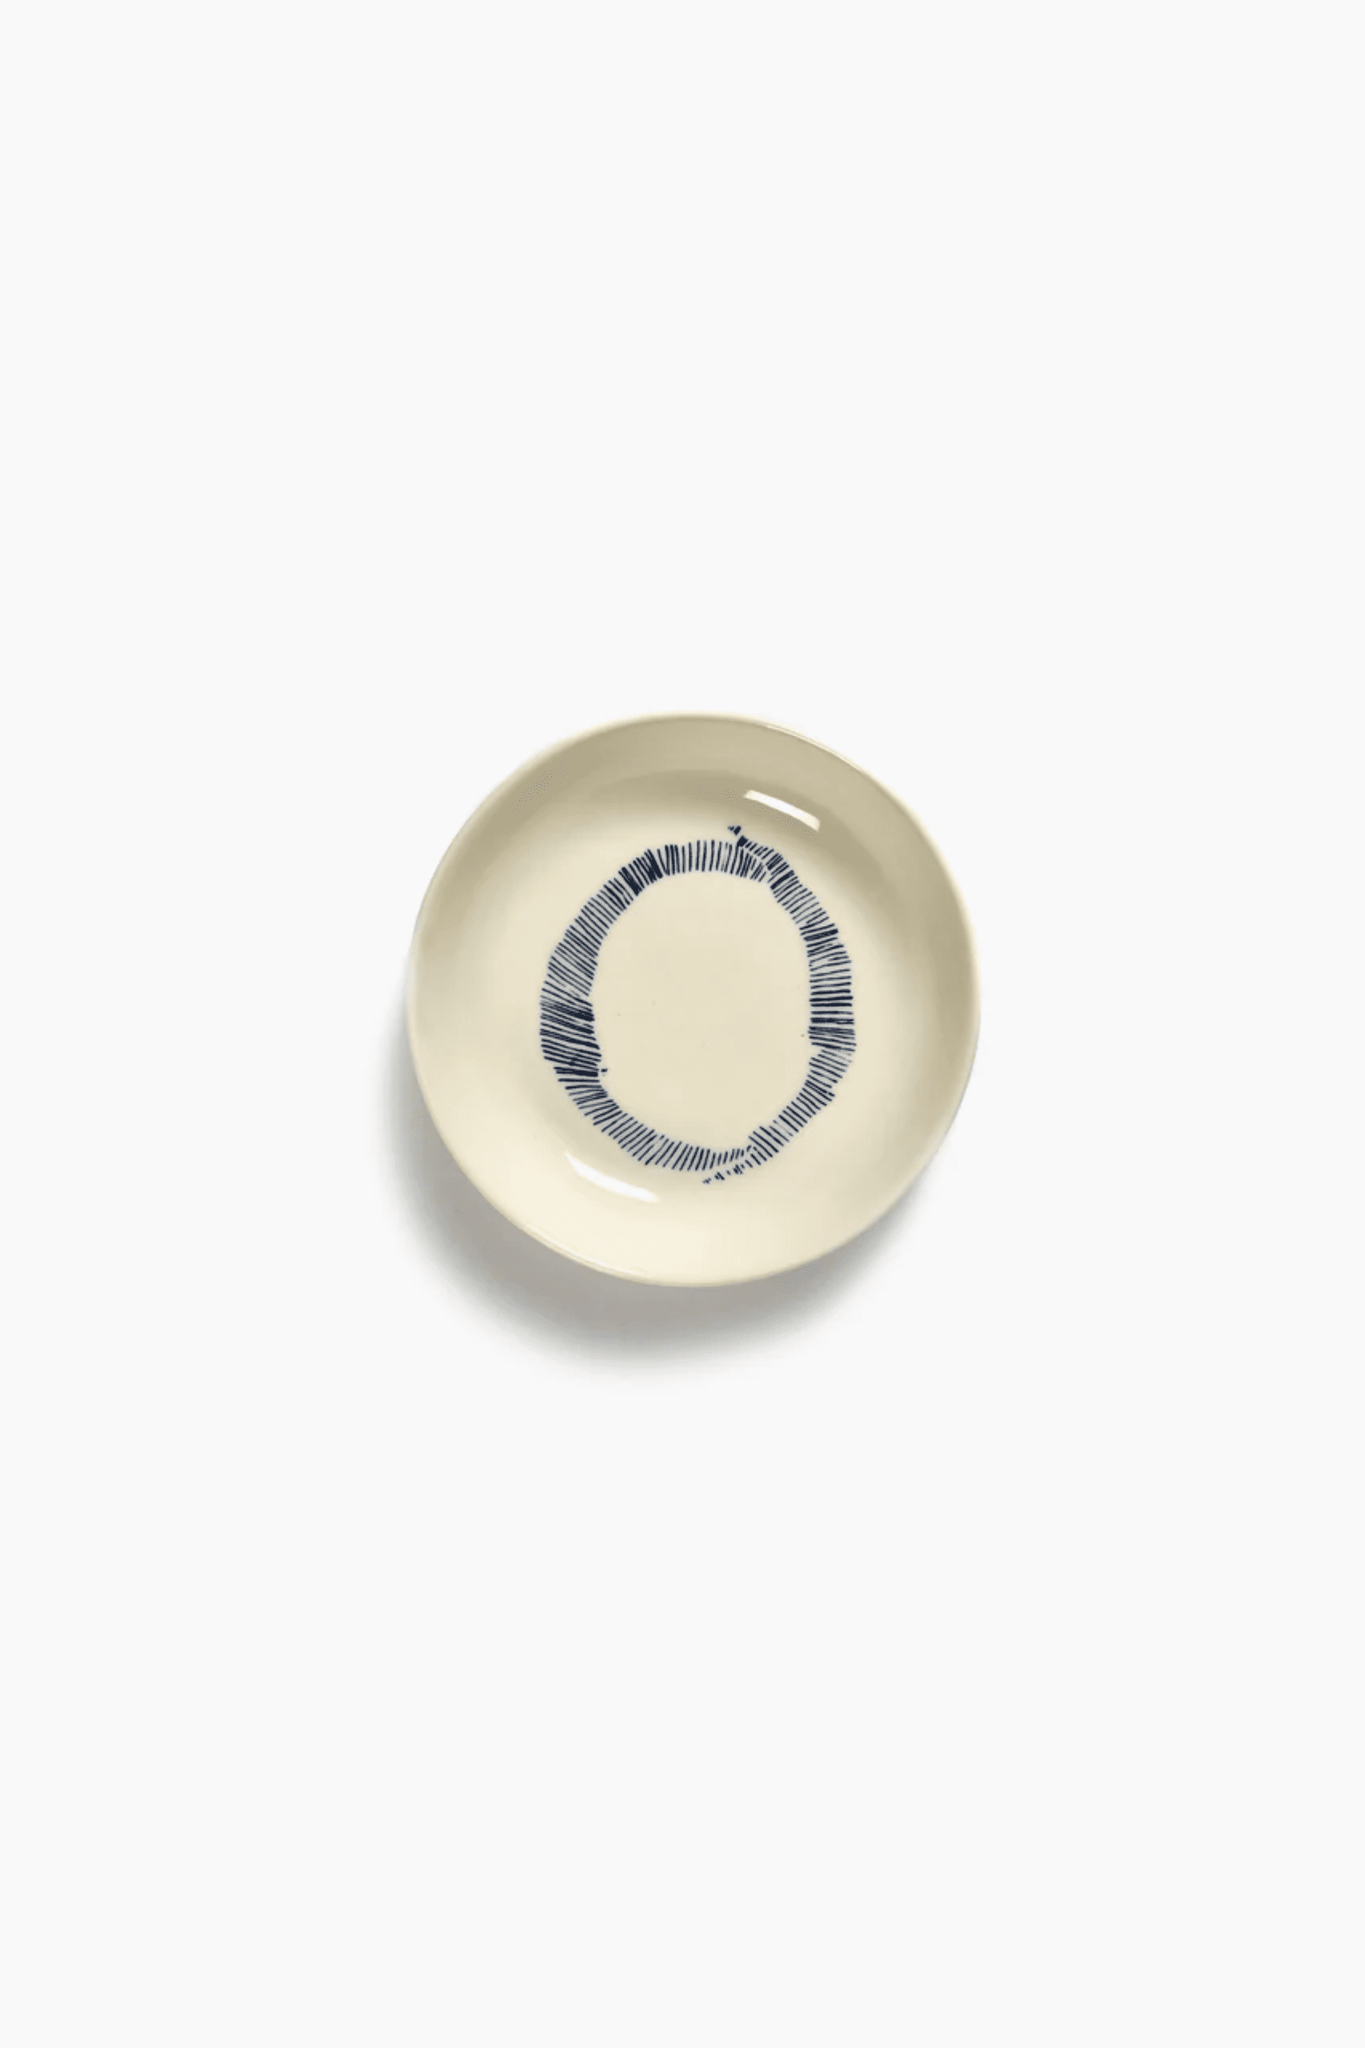 Small Dish, White Swirl with Blue Stripes Ottolenghi Serax, top view